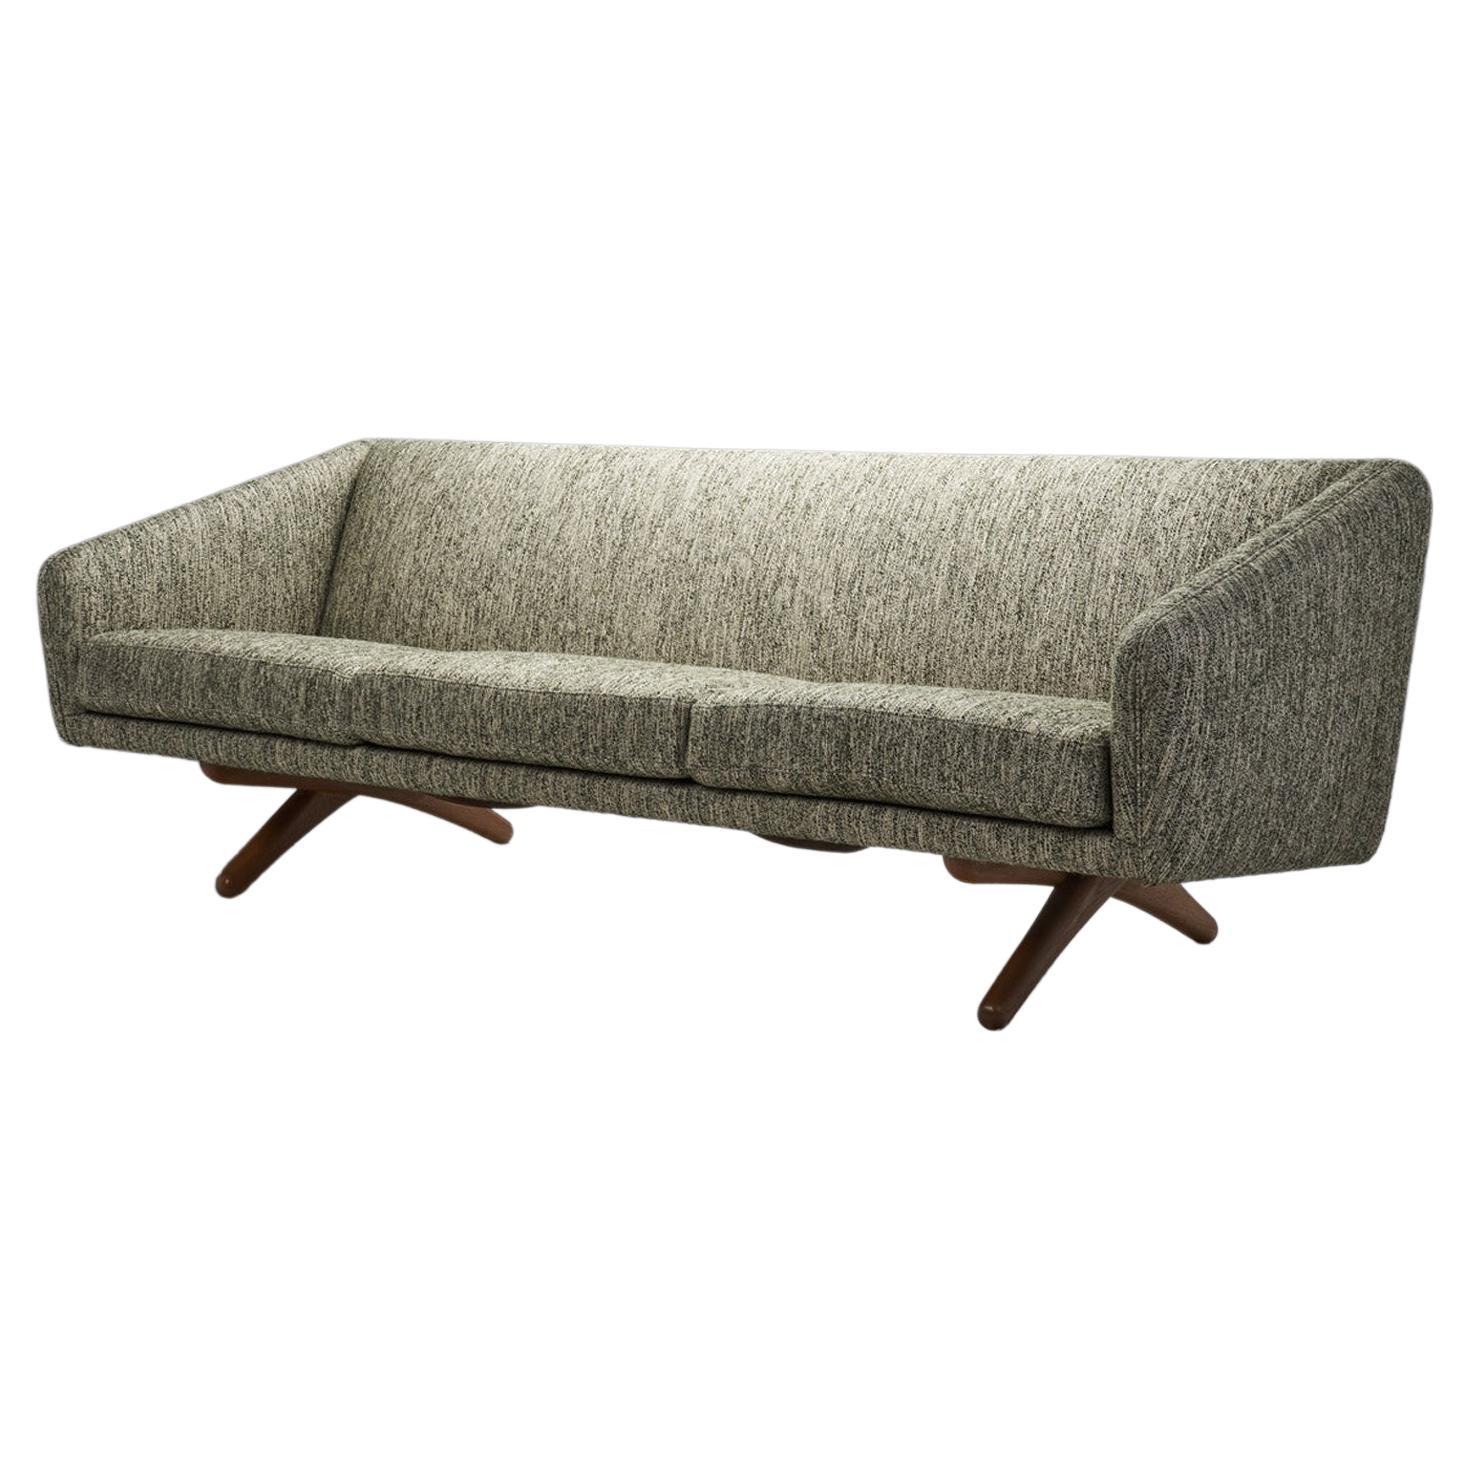 Mid-Century Modern Three-Seater Sofa with Wooden Cross Legs, Europe, ca 1950s For Sale